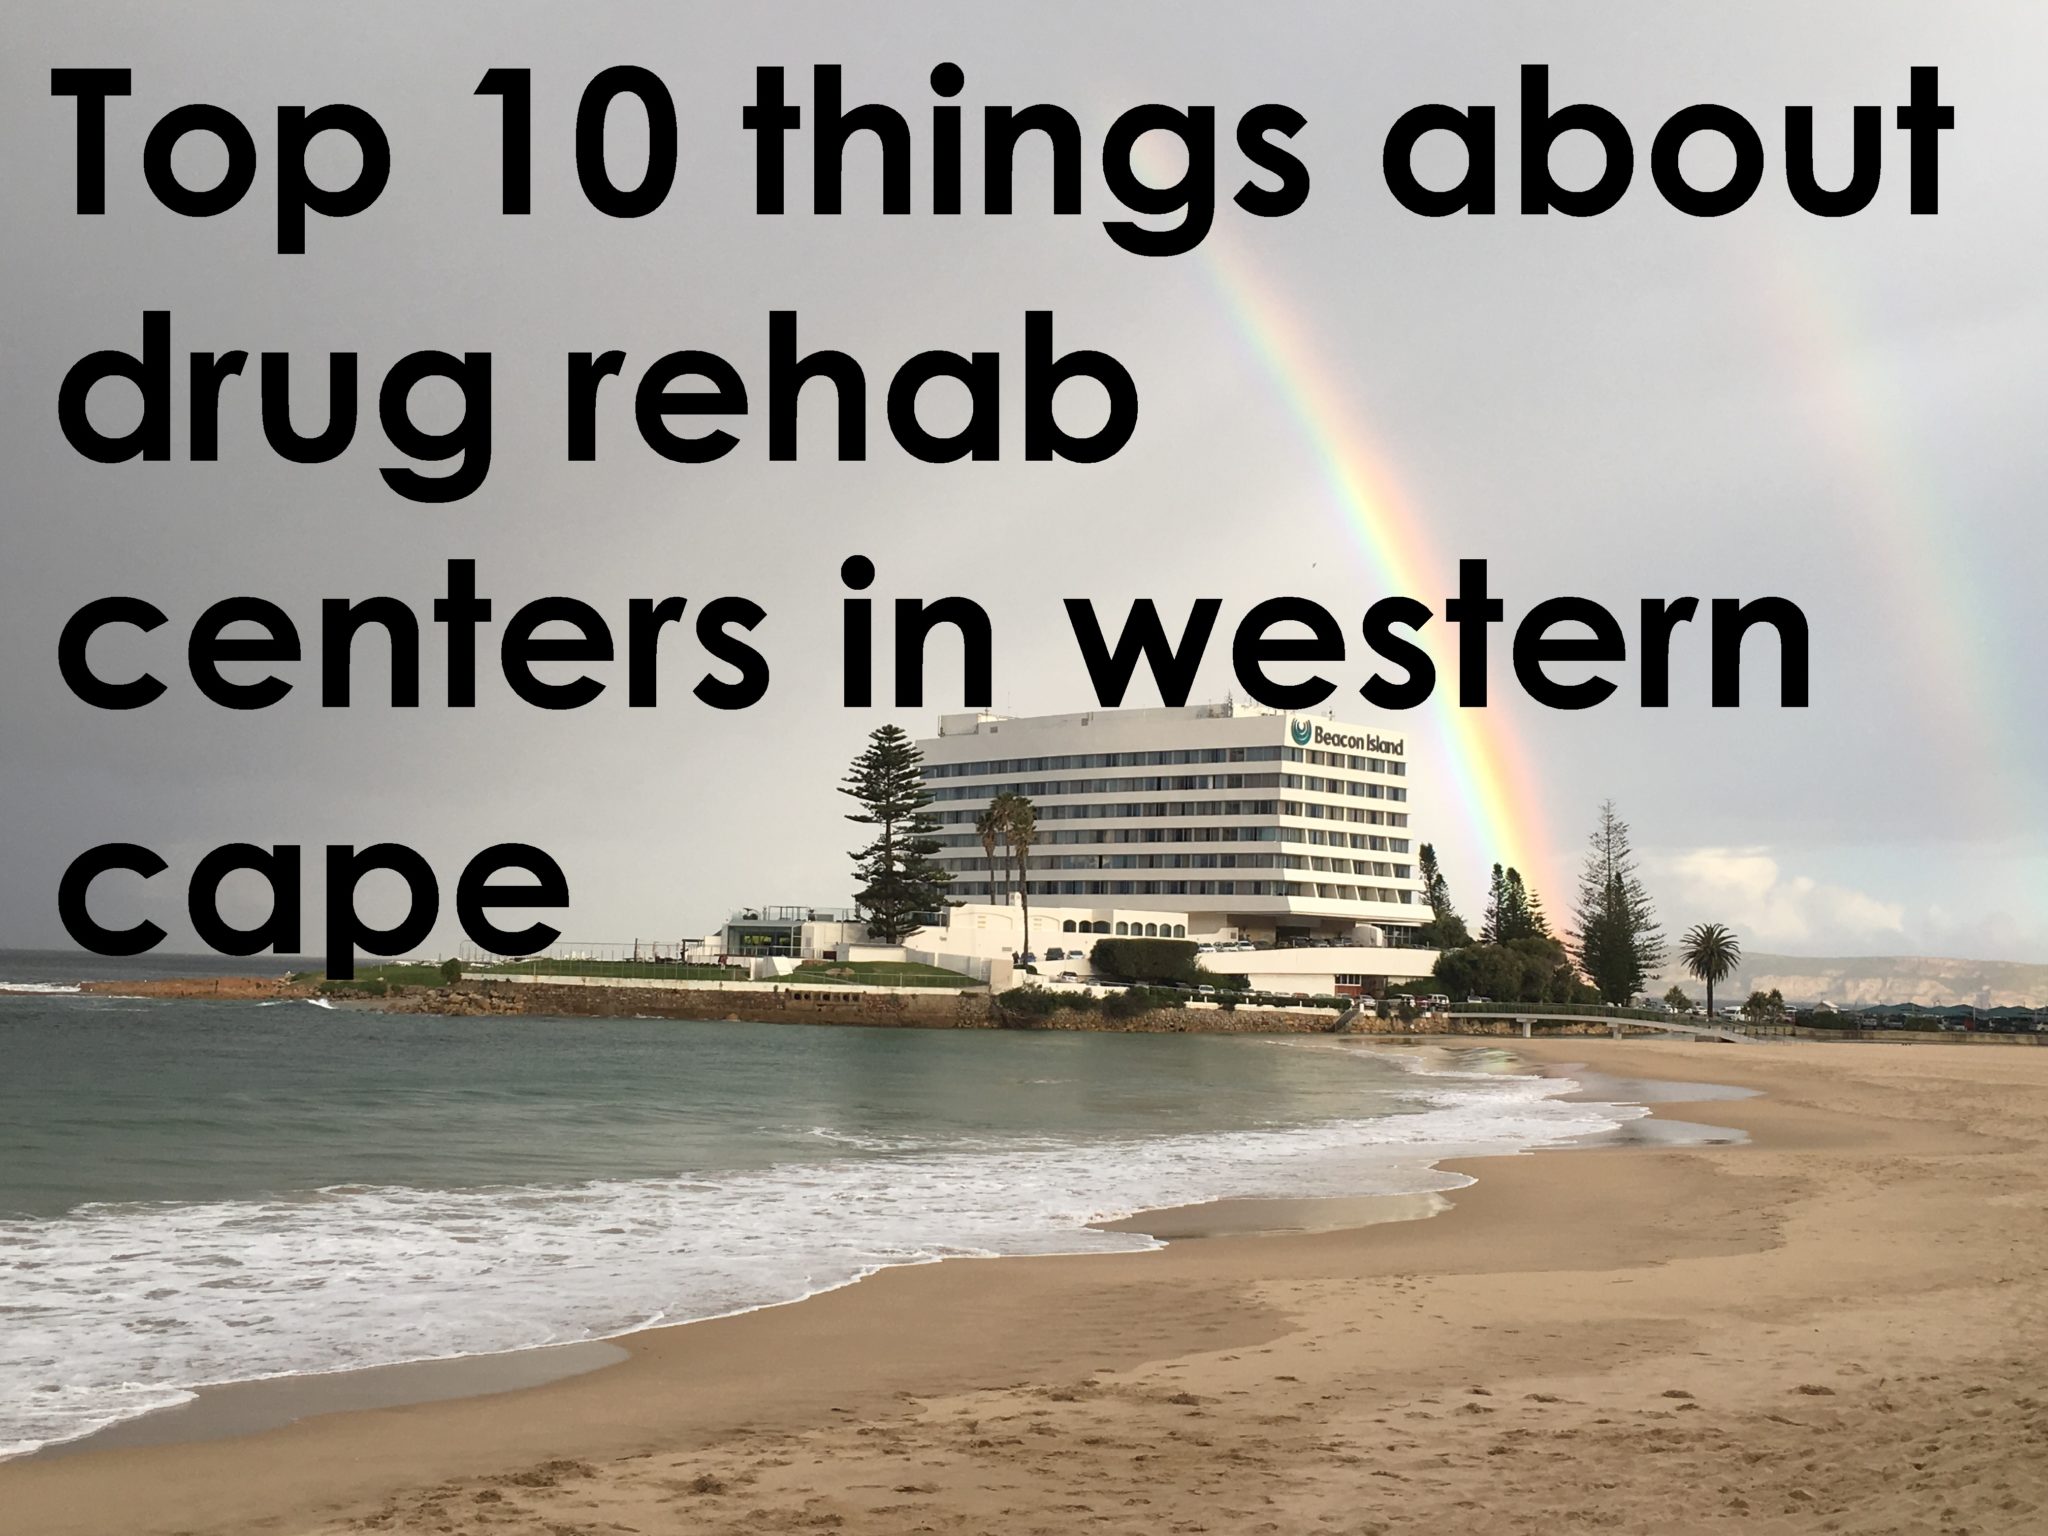 Drug rehab centers in western cape